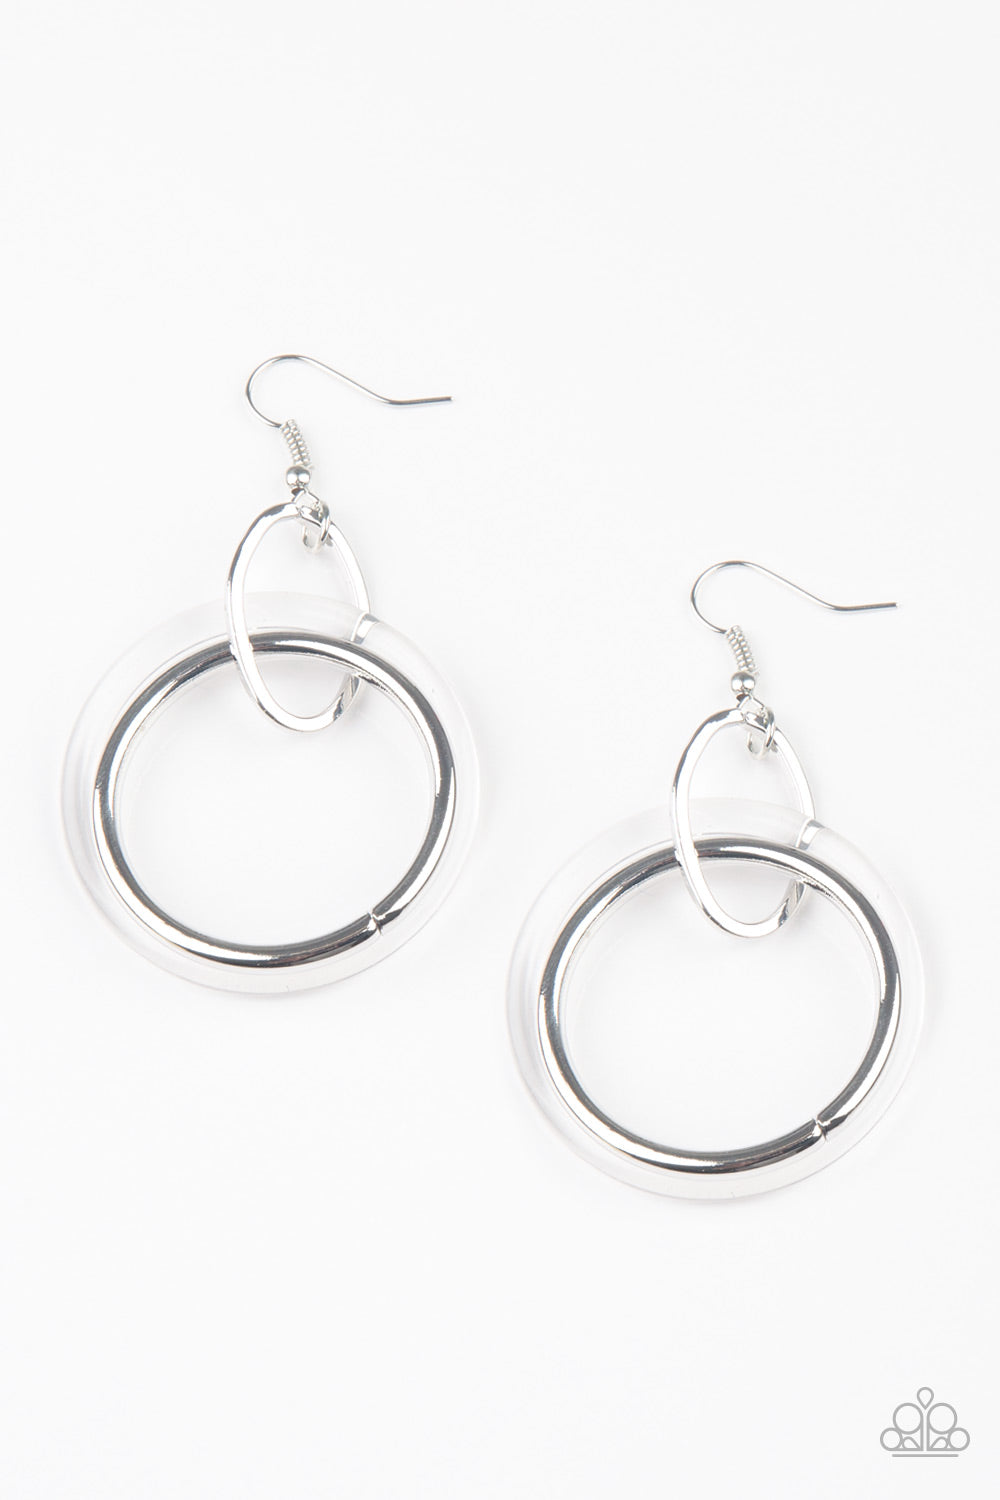 CIRCUS CIRCUIT - WHITE CLEAR ACRYLIC SILVER CIRCLES DOUBLE HOOP EARRINGS